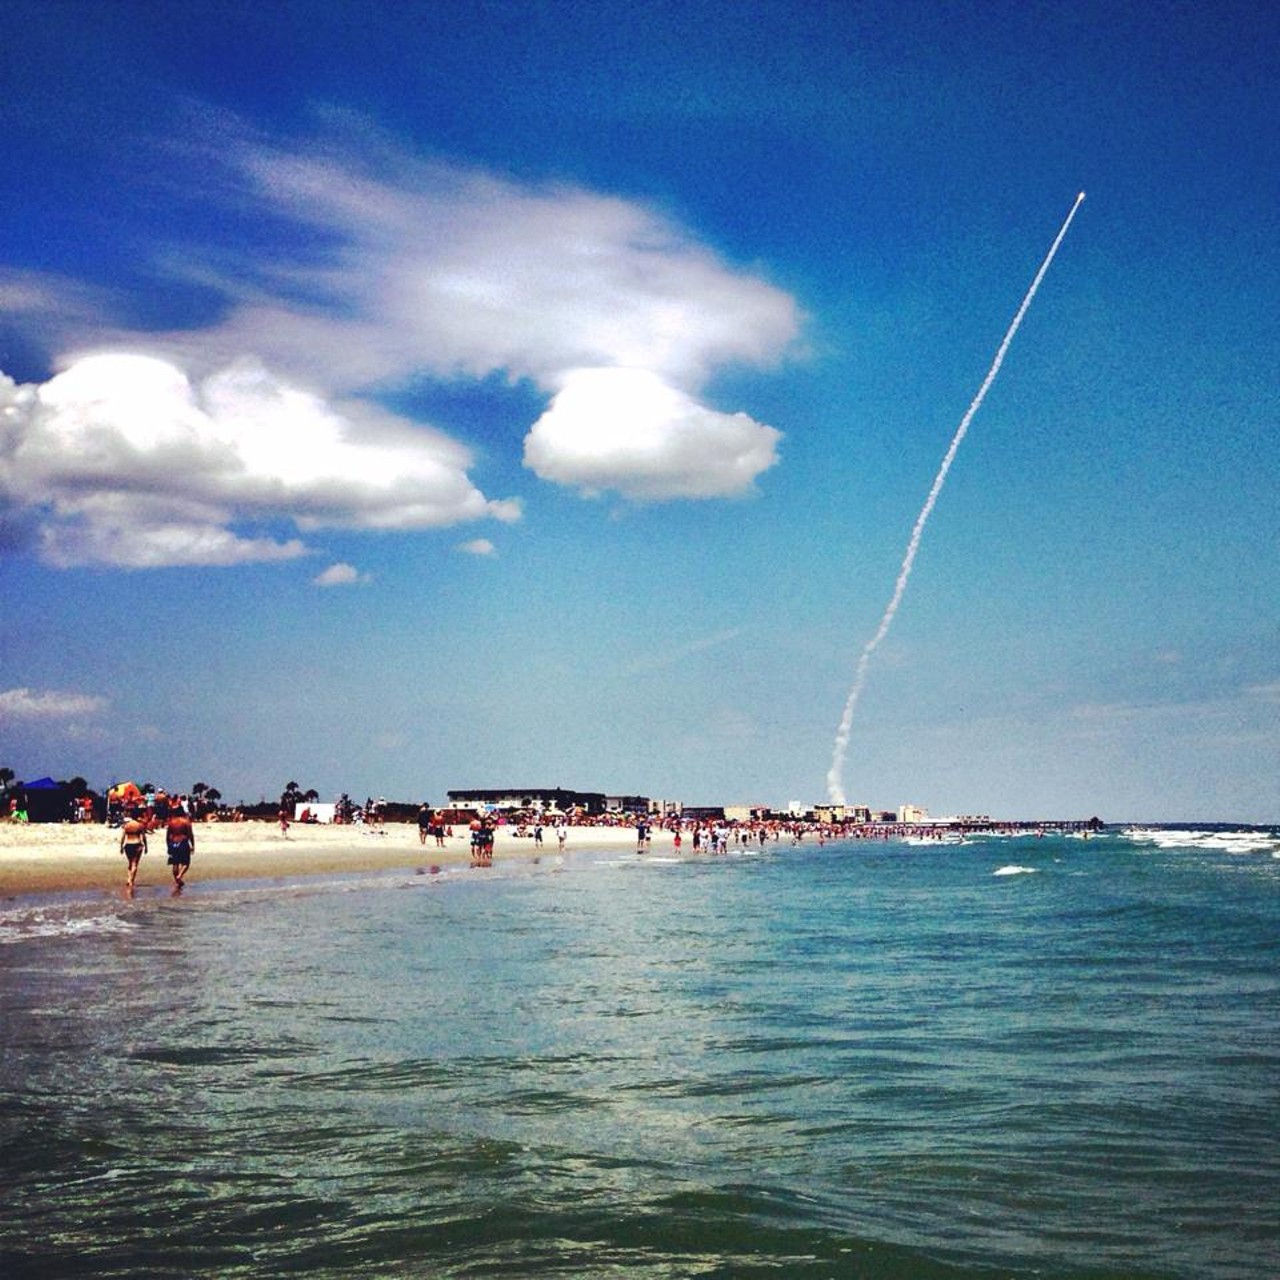 Watch a rocket launch from Coconuts at Cocoa Beach
Drive time: 1hr 
Be sure to check the Kennedy Center's Launch schedule. But rockets or not, Coconuts is one of the best party patios at Cocoa Beach. 
Photo via Technology.org